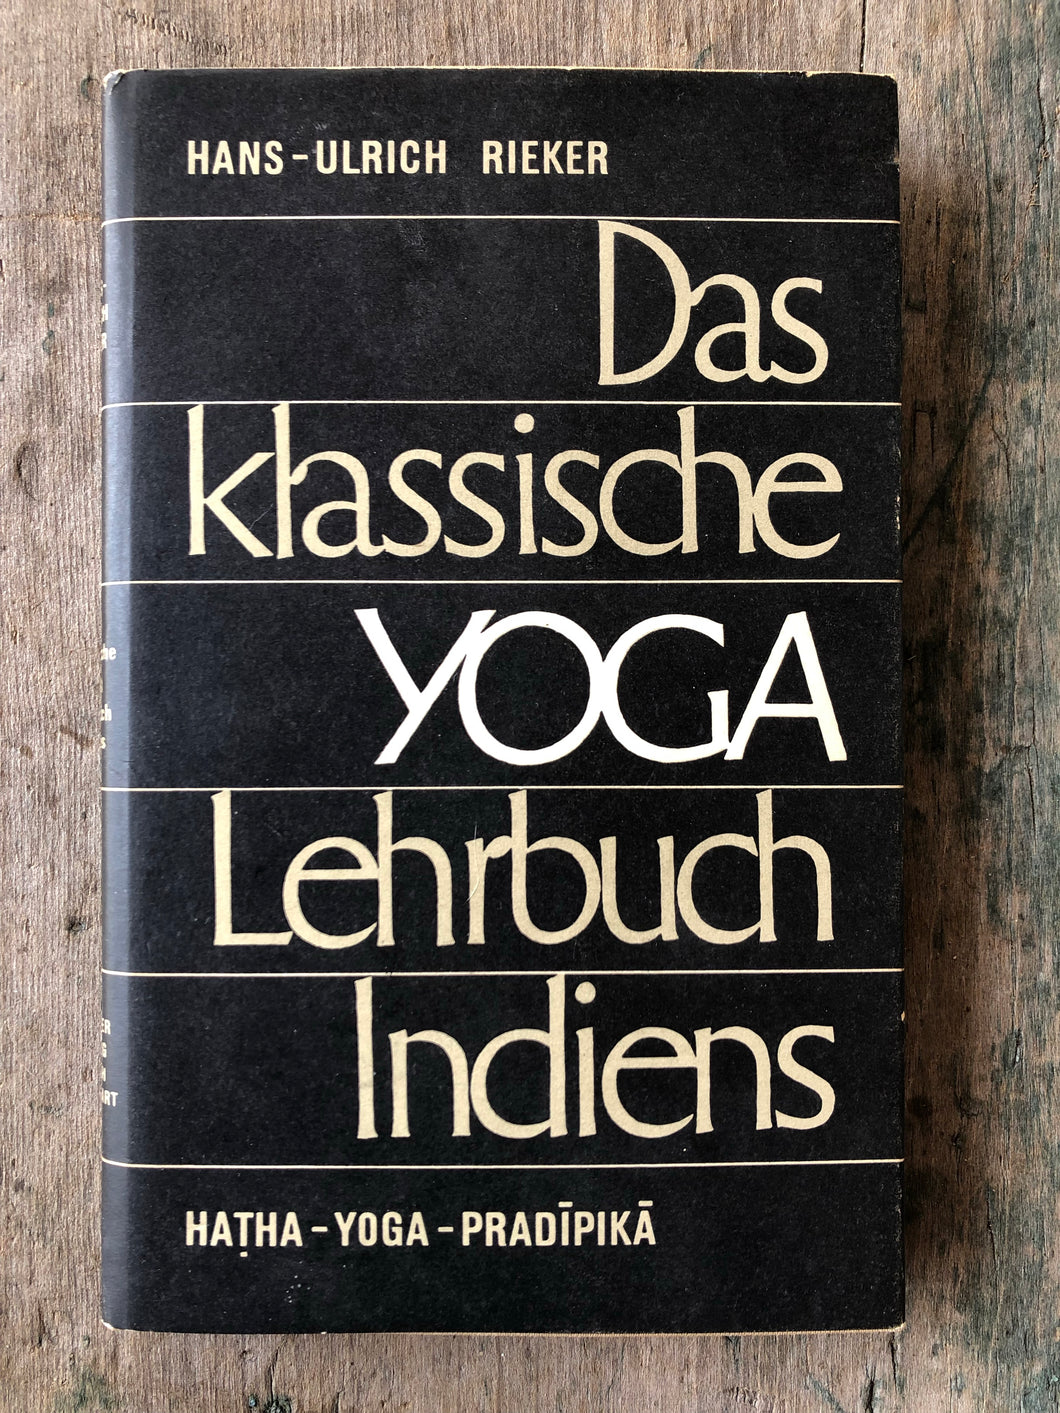 Das klassische Yoga-Lehrbuch Indiens, Hatha-Yoga Pradipika. Translated from the Sanskrit and with commentary by Hans-Ulrich Reiker